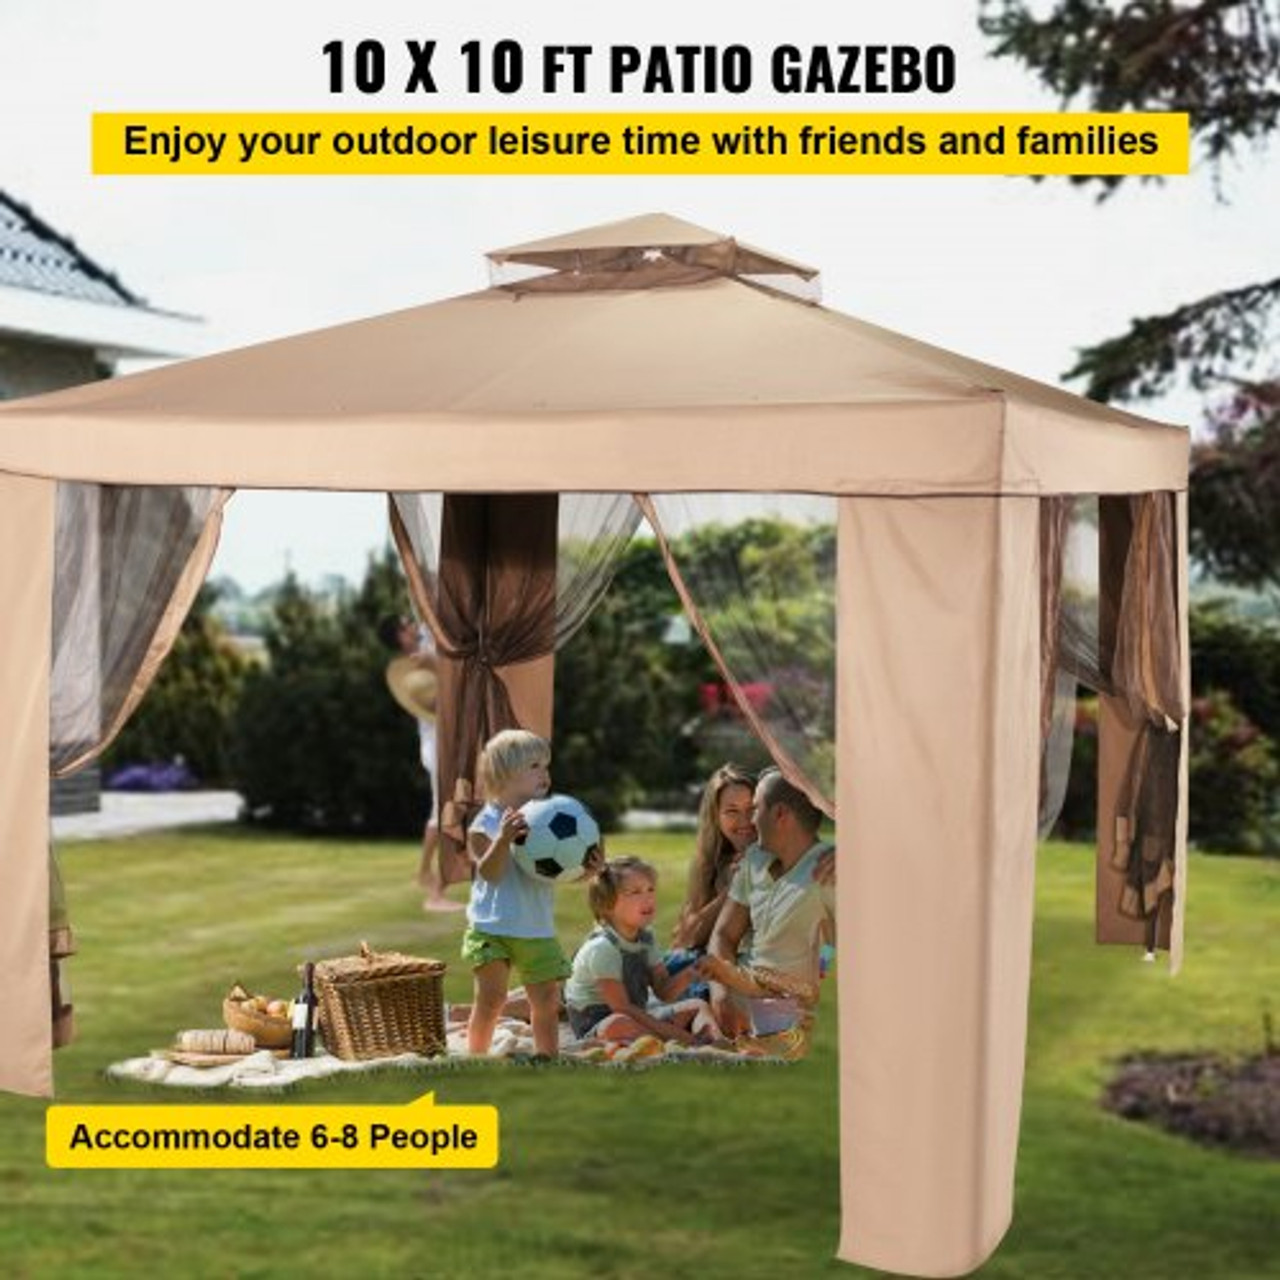 Outdoor Canopy Gazebo Tent, Portable Canopy Shelter with 10'x10' Large Shade Space for Party, Backyard, Patio Lawn and Garden, 4 Sandbags, and Netting Included, Brown